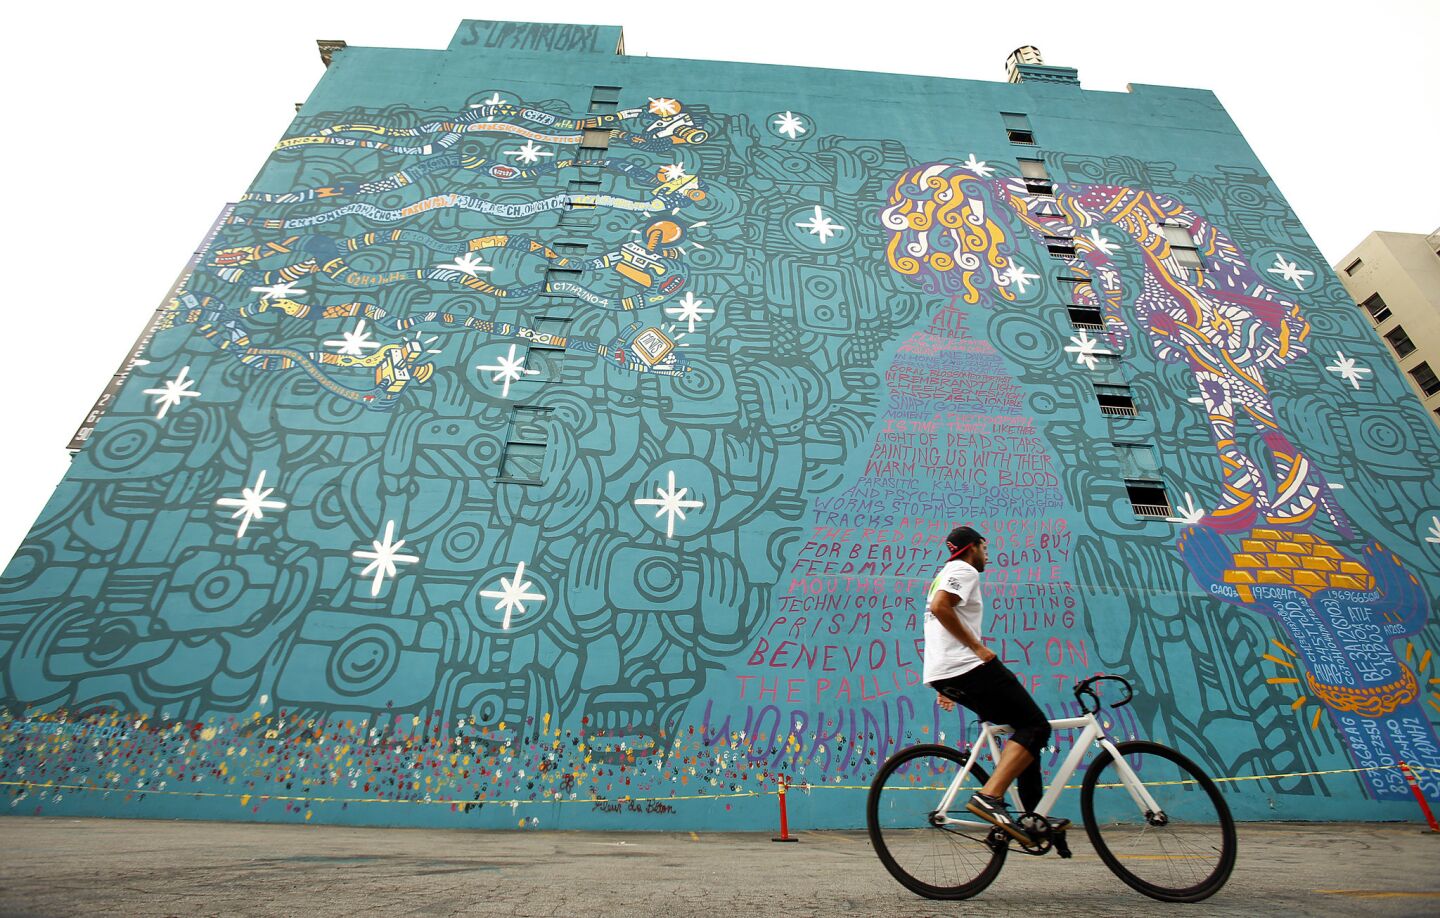 While the removal of indie rock band Foster the People's mural in downtown Los Angeles was initially delayed with the intervention of Mayor Eric Garcetti's office, when it was discovered that the mural ran afoul of preservation codes for the historic Santa Fe Lofts in August, it was painted over.